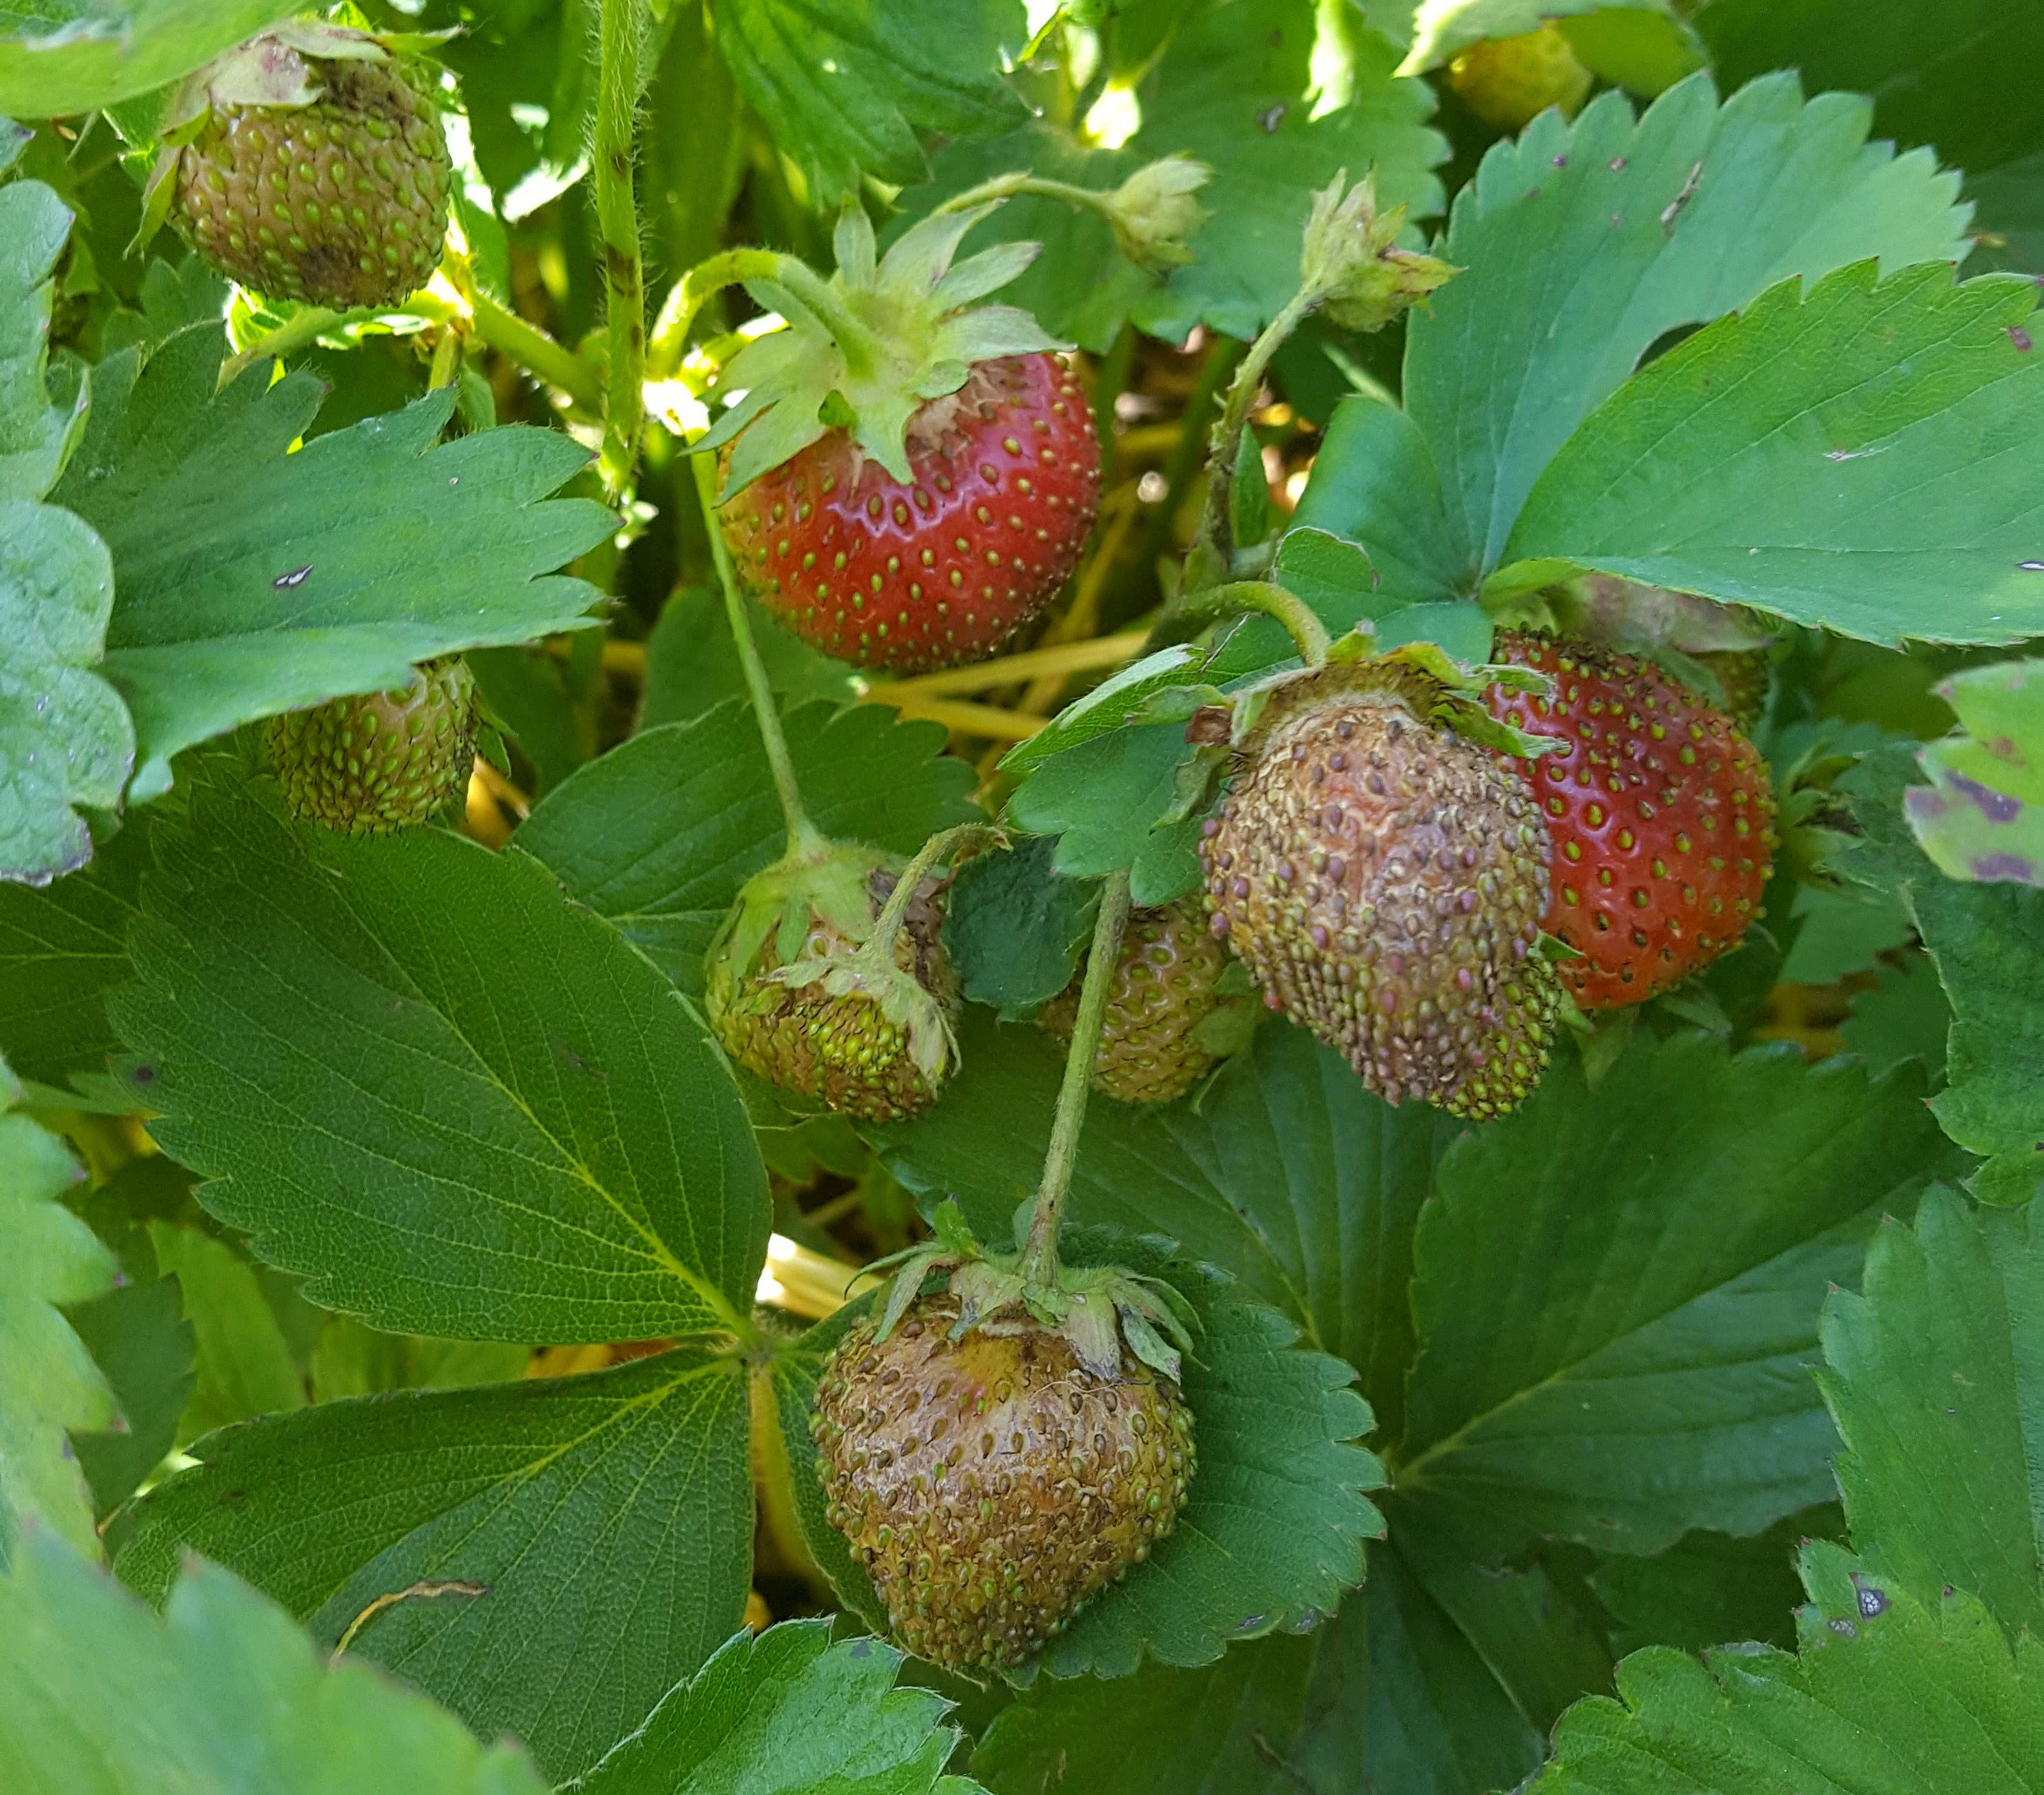 Strawberry fruit with bronzing due flower thrips damage